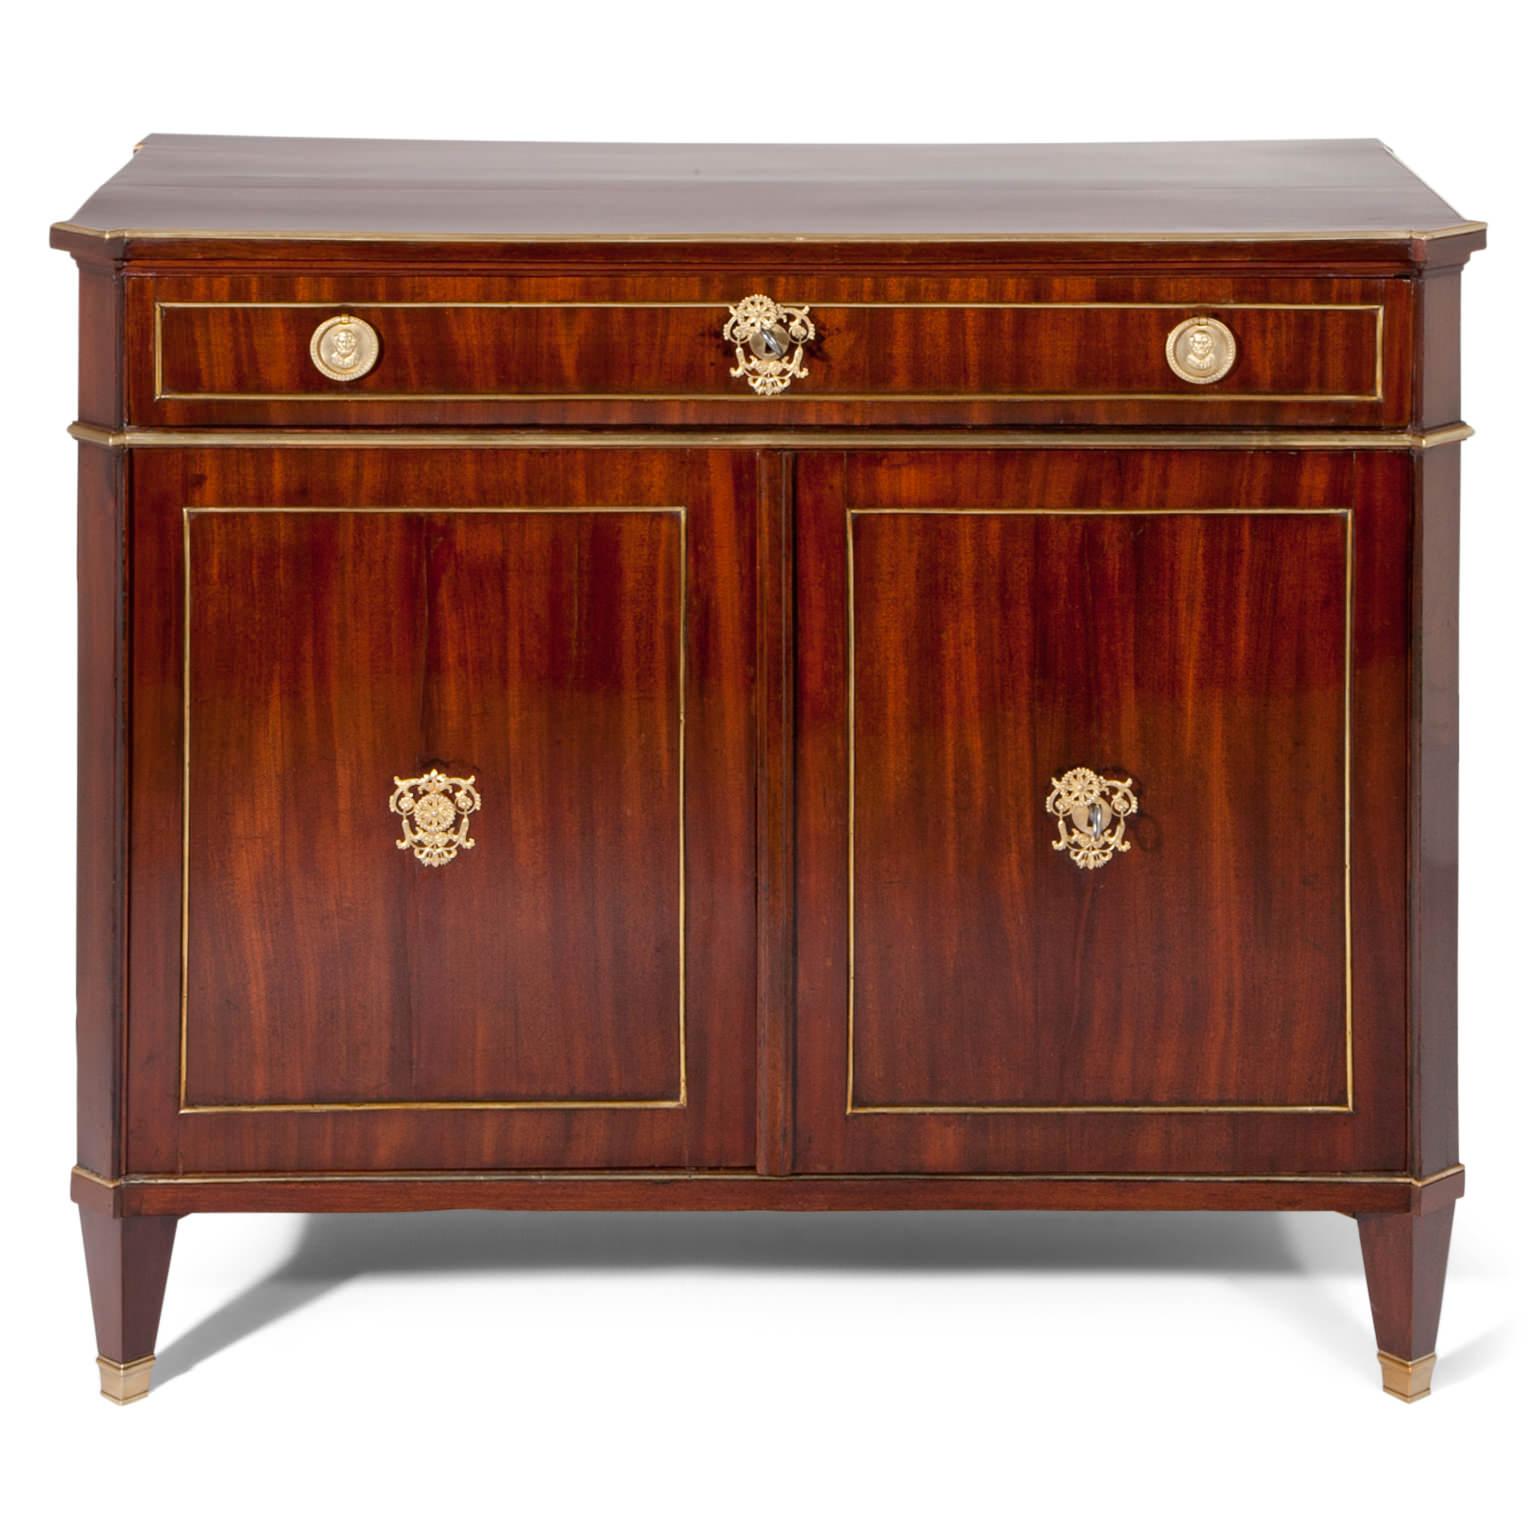 Two-doored cabinet with one top drawer and tapered feet with brass sabots. The corners of the cabinet are slanted. The fillings and edges of the cabinet are framed with brass moldings.